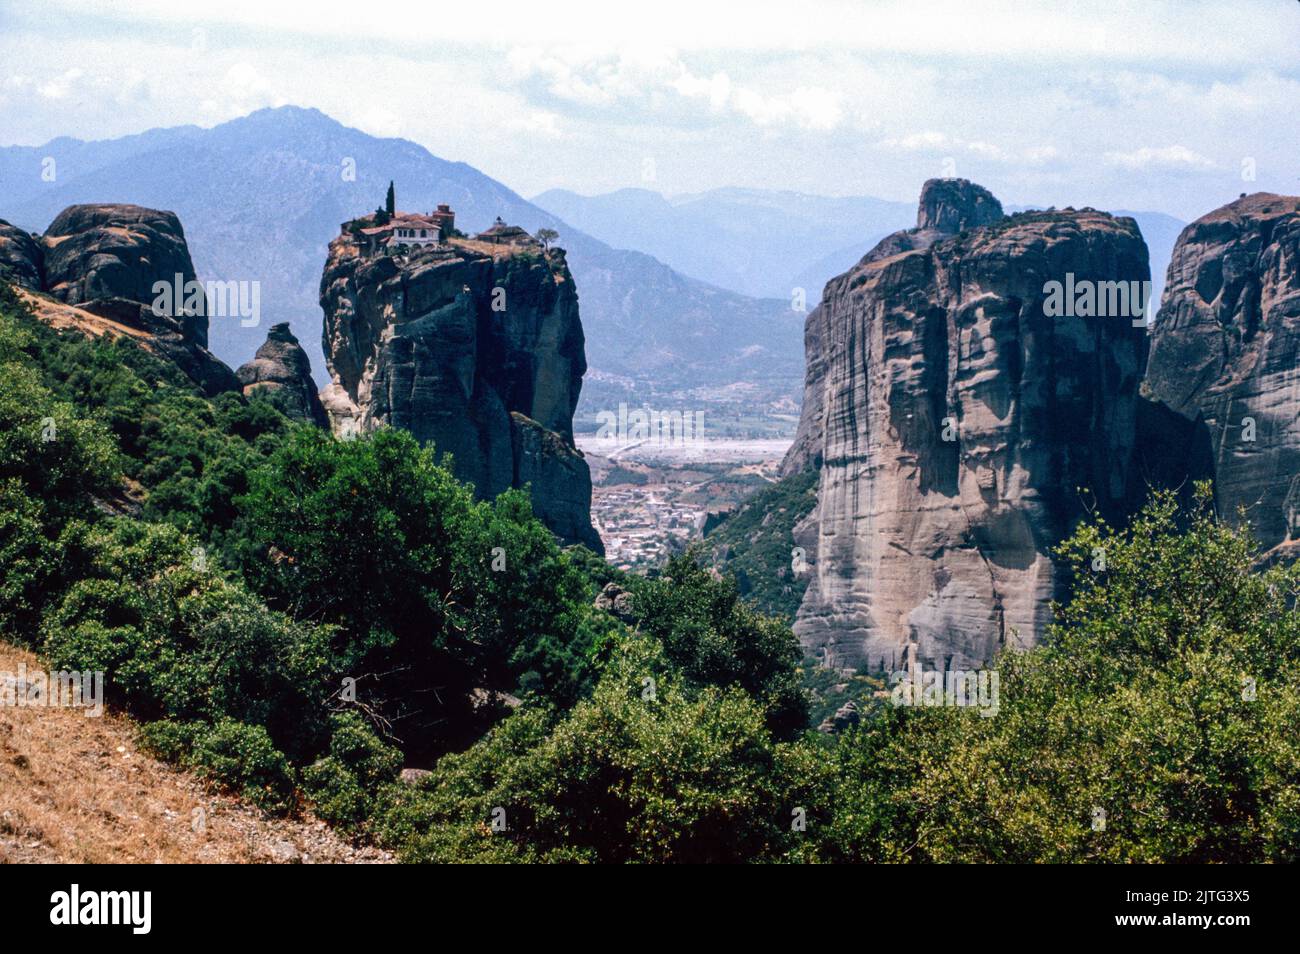 The Meteora - a rock formation in central Greece hosting one of the largest and most precipitously built complexes of Eastern Orthodox monasteries. March 1980. Archival scan from a slide. Stock Photo